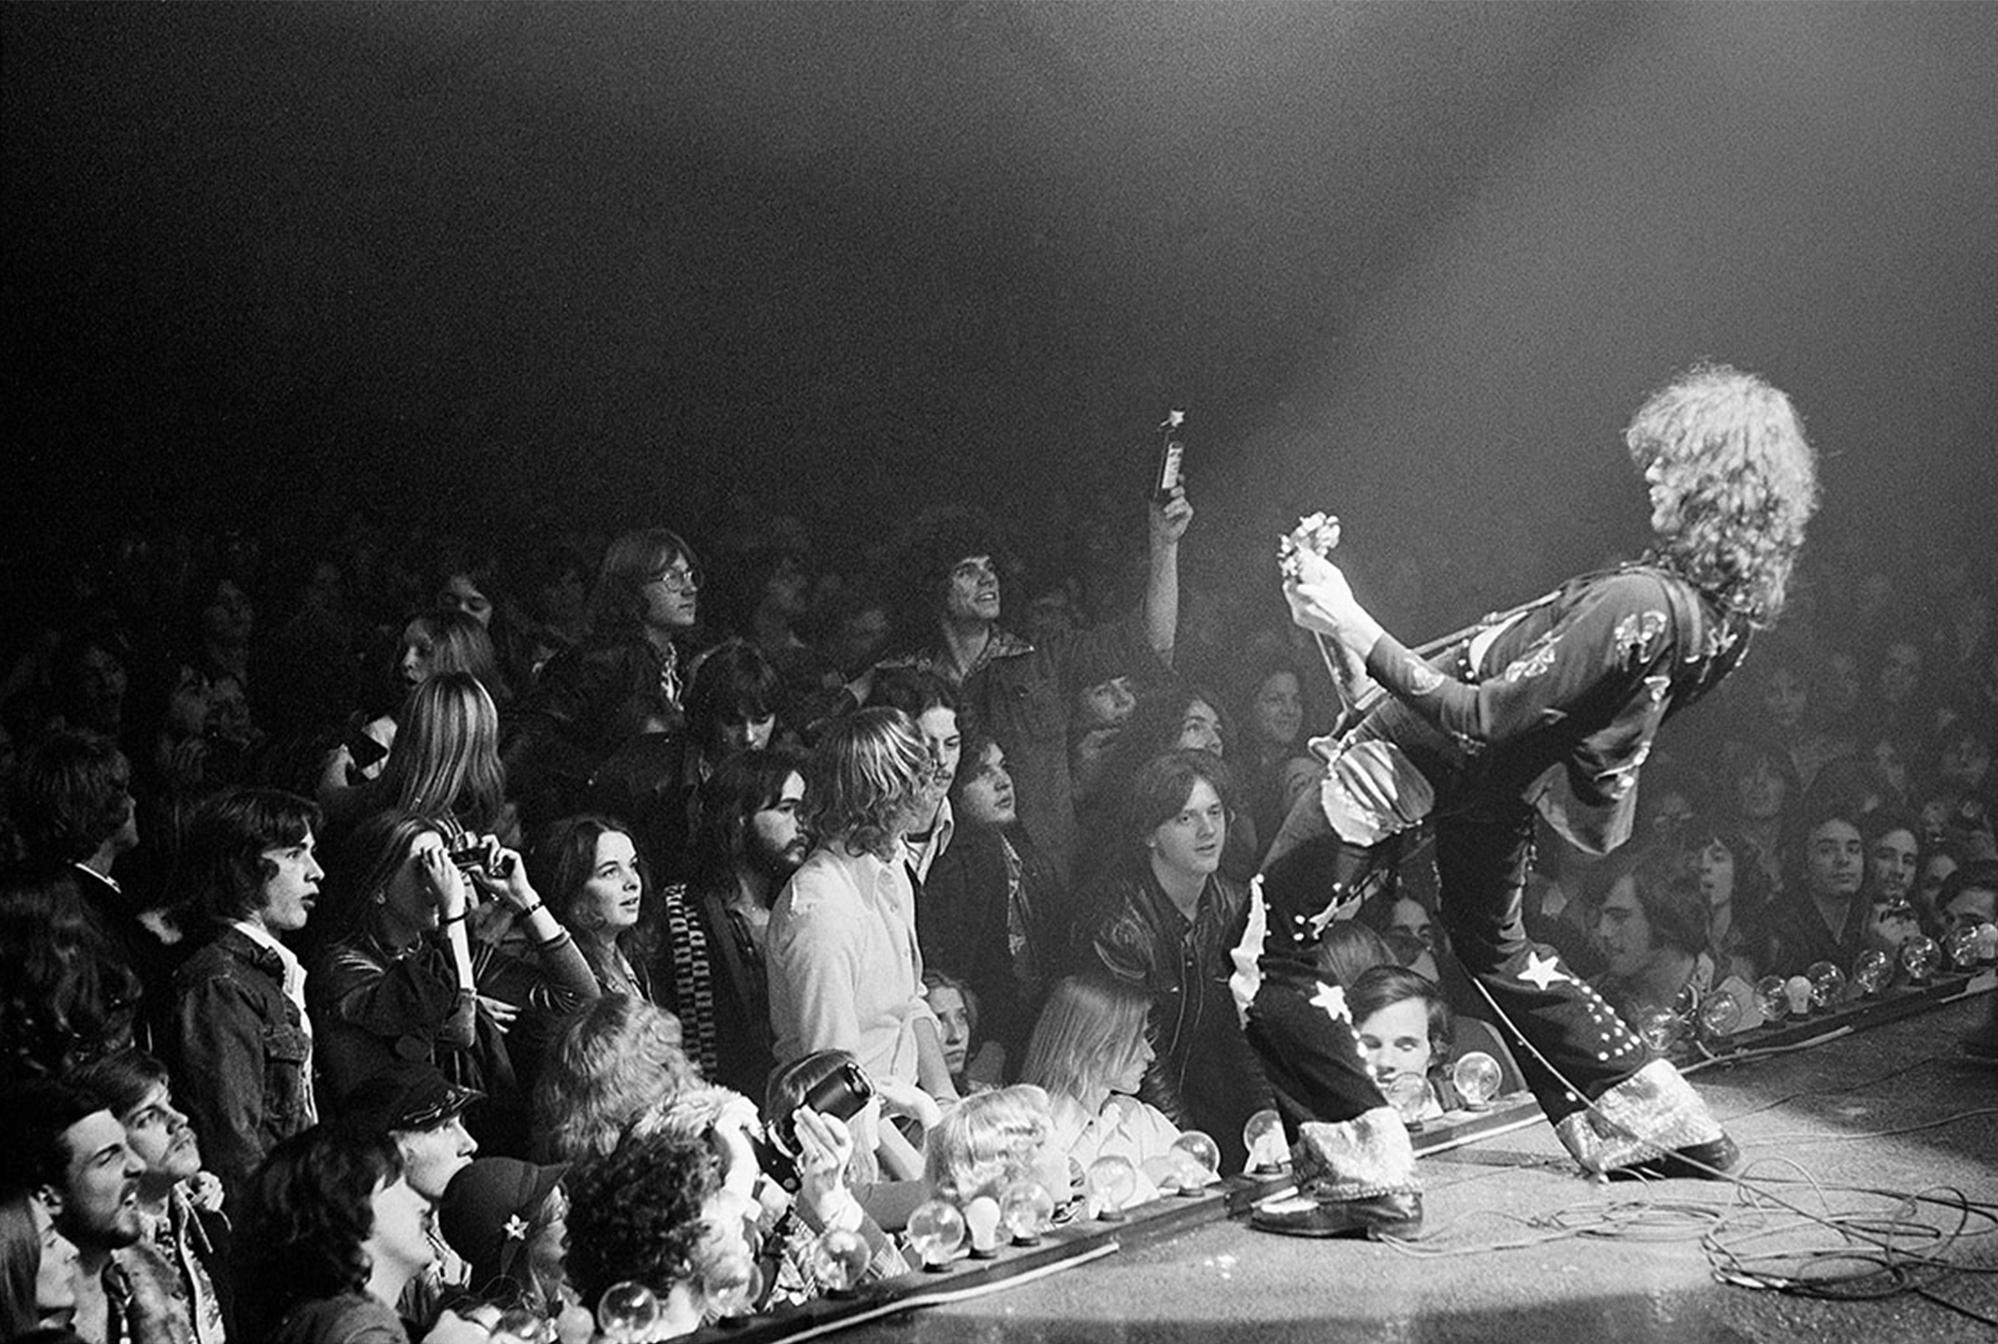 Michael Brennan Black and White Photograph - Jimmy Page Led Zeppelin live on stage 1975